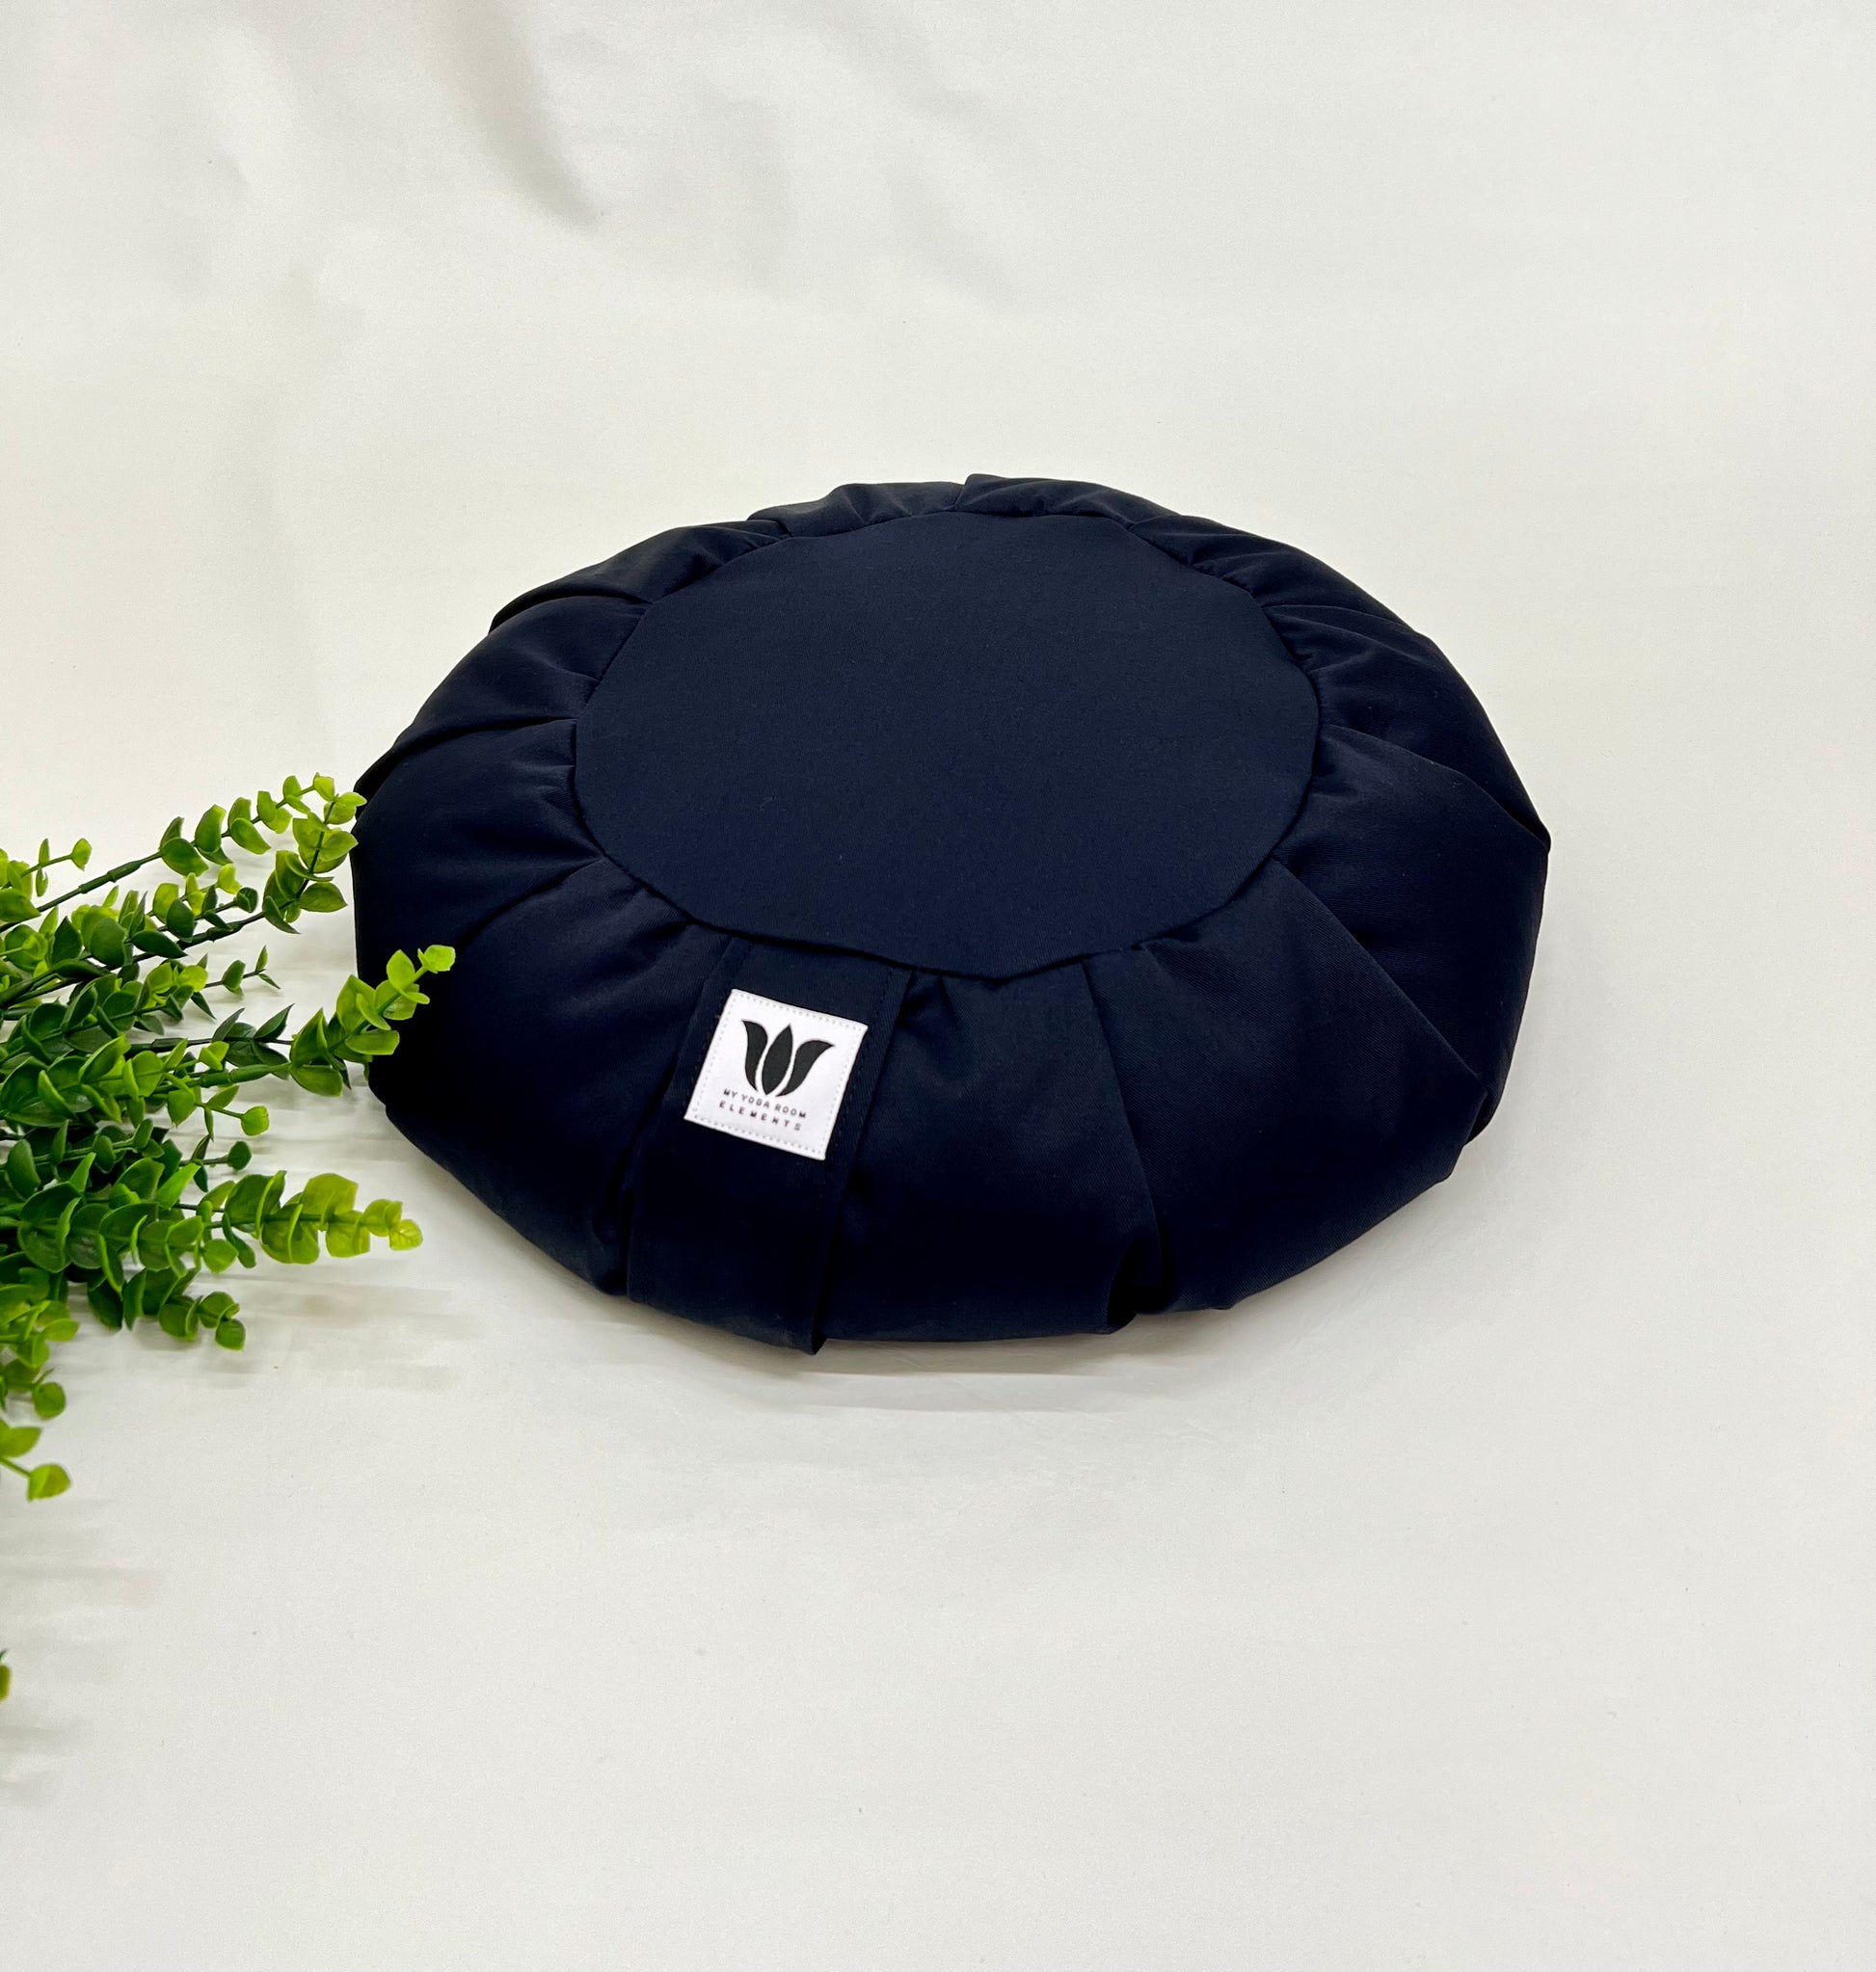 Handcrafted premium cotton canvas fabric meditation seat cushion in solid navy blue fabric. Align the spine and body in comfort to calm the monkey mind in your meditation practice. Handcrafted in Calgary, Alberta Canada